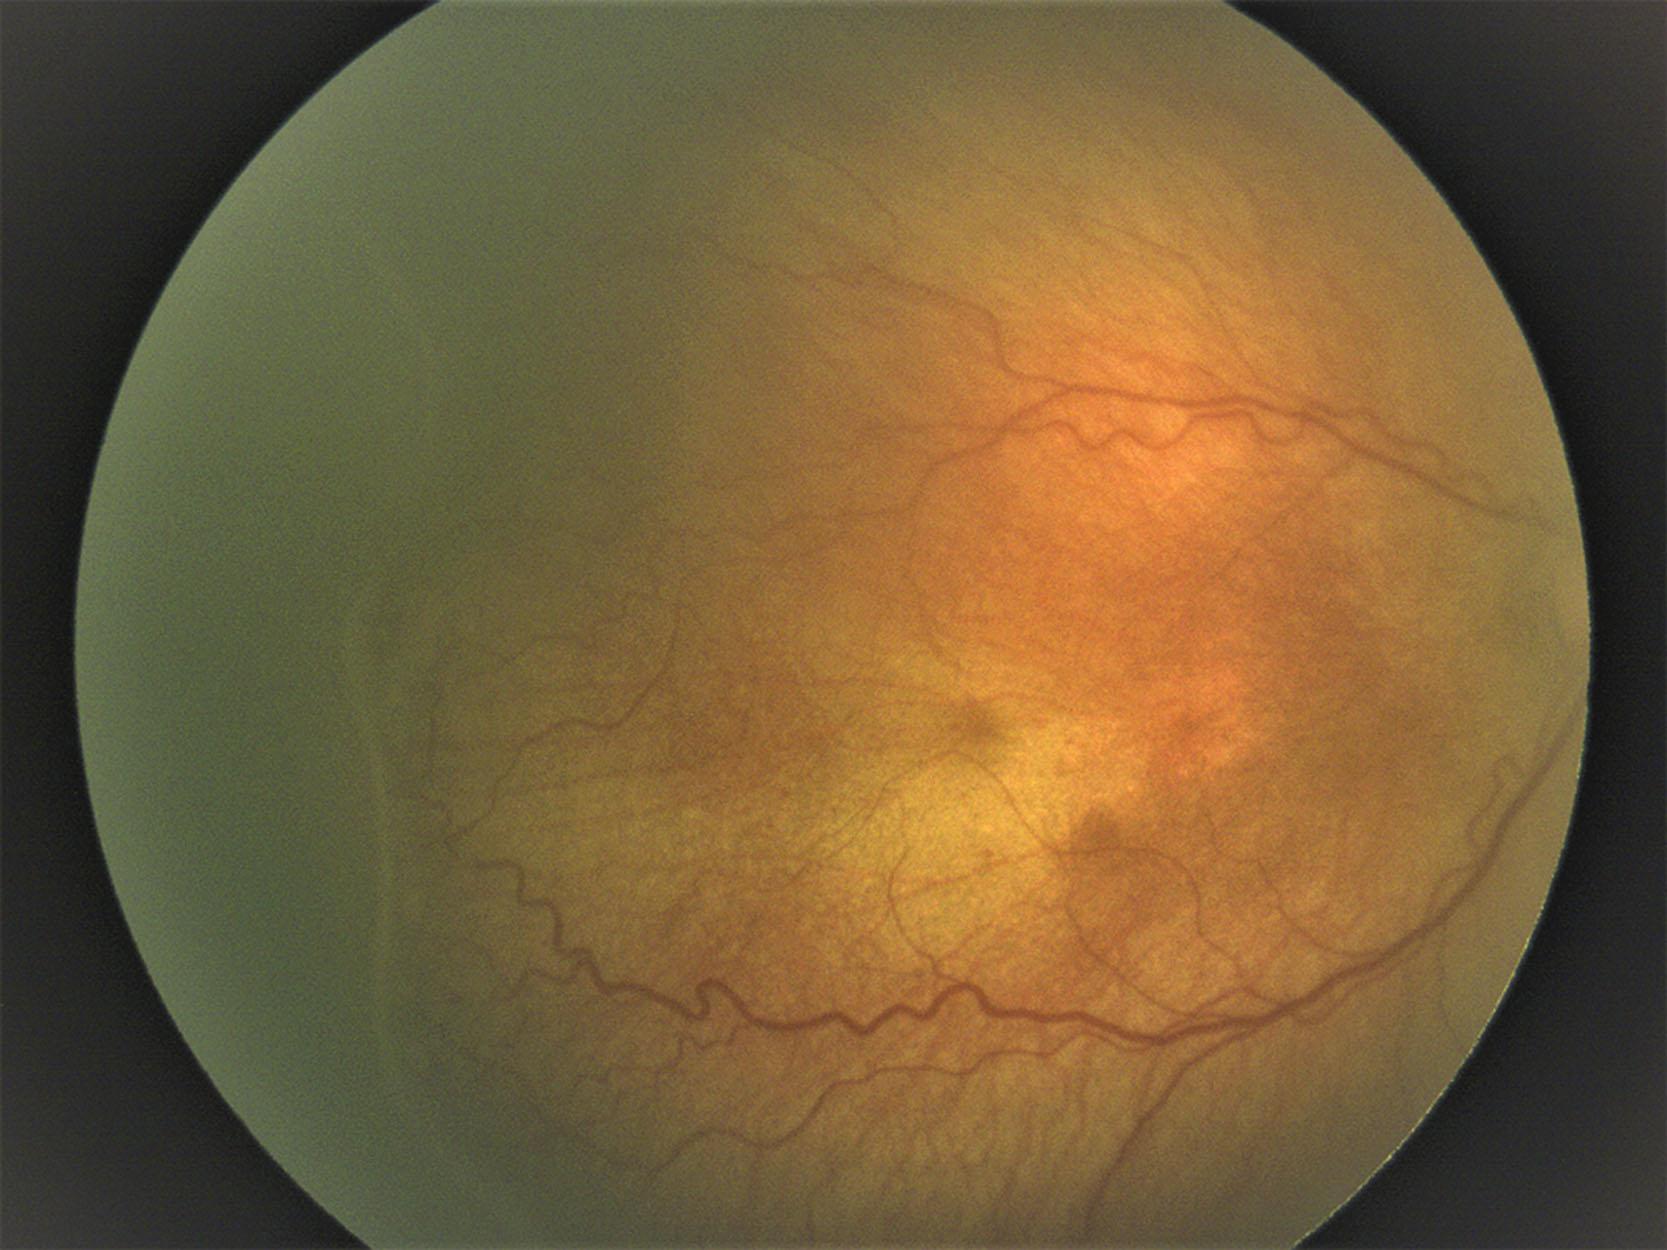 Fig. 43.5, Stage 2 retinopathy of prematurity with pre-plus disease. Thick line present in the temporal retina. The small tufts of neovascular tissue lying on the surface of the retina are referred to as “popcorn” and can be seen posterior to ridges; these are usually benign. Note the increased vessel tortuosity compared to ( Figs. 43.3 and 43.4 ) but the mild appearance compared to Fig. 43.9 .